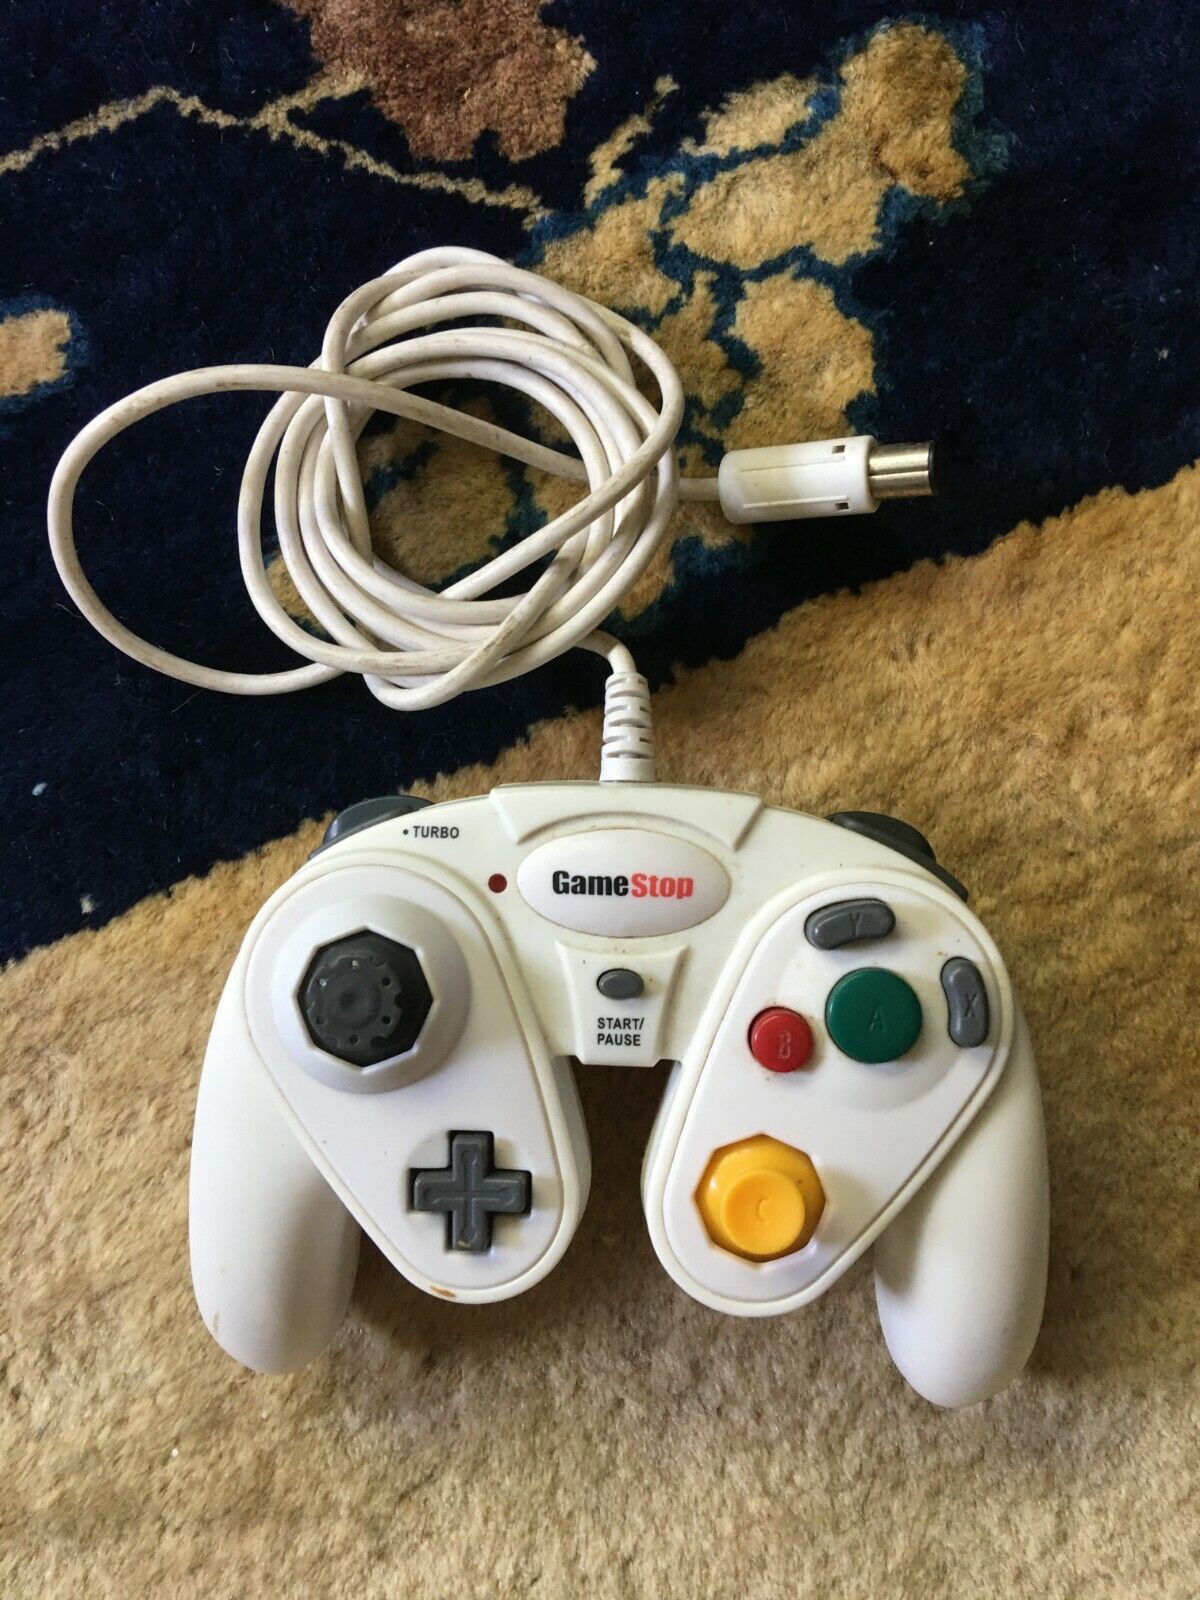 GameStop G3 Wired Turbo Controller for Nintendo GameCube & Wii - White